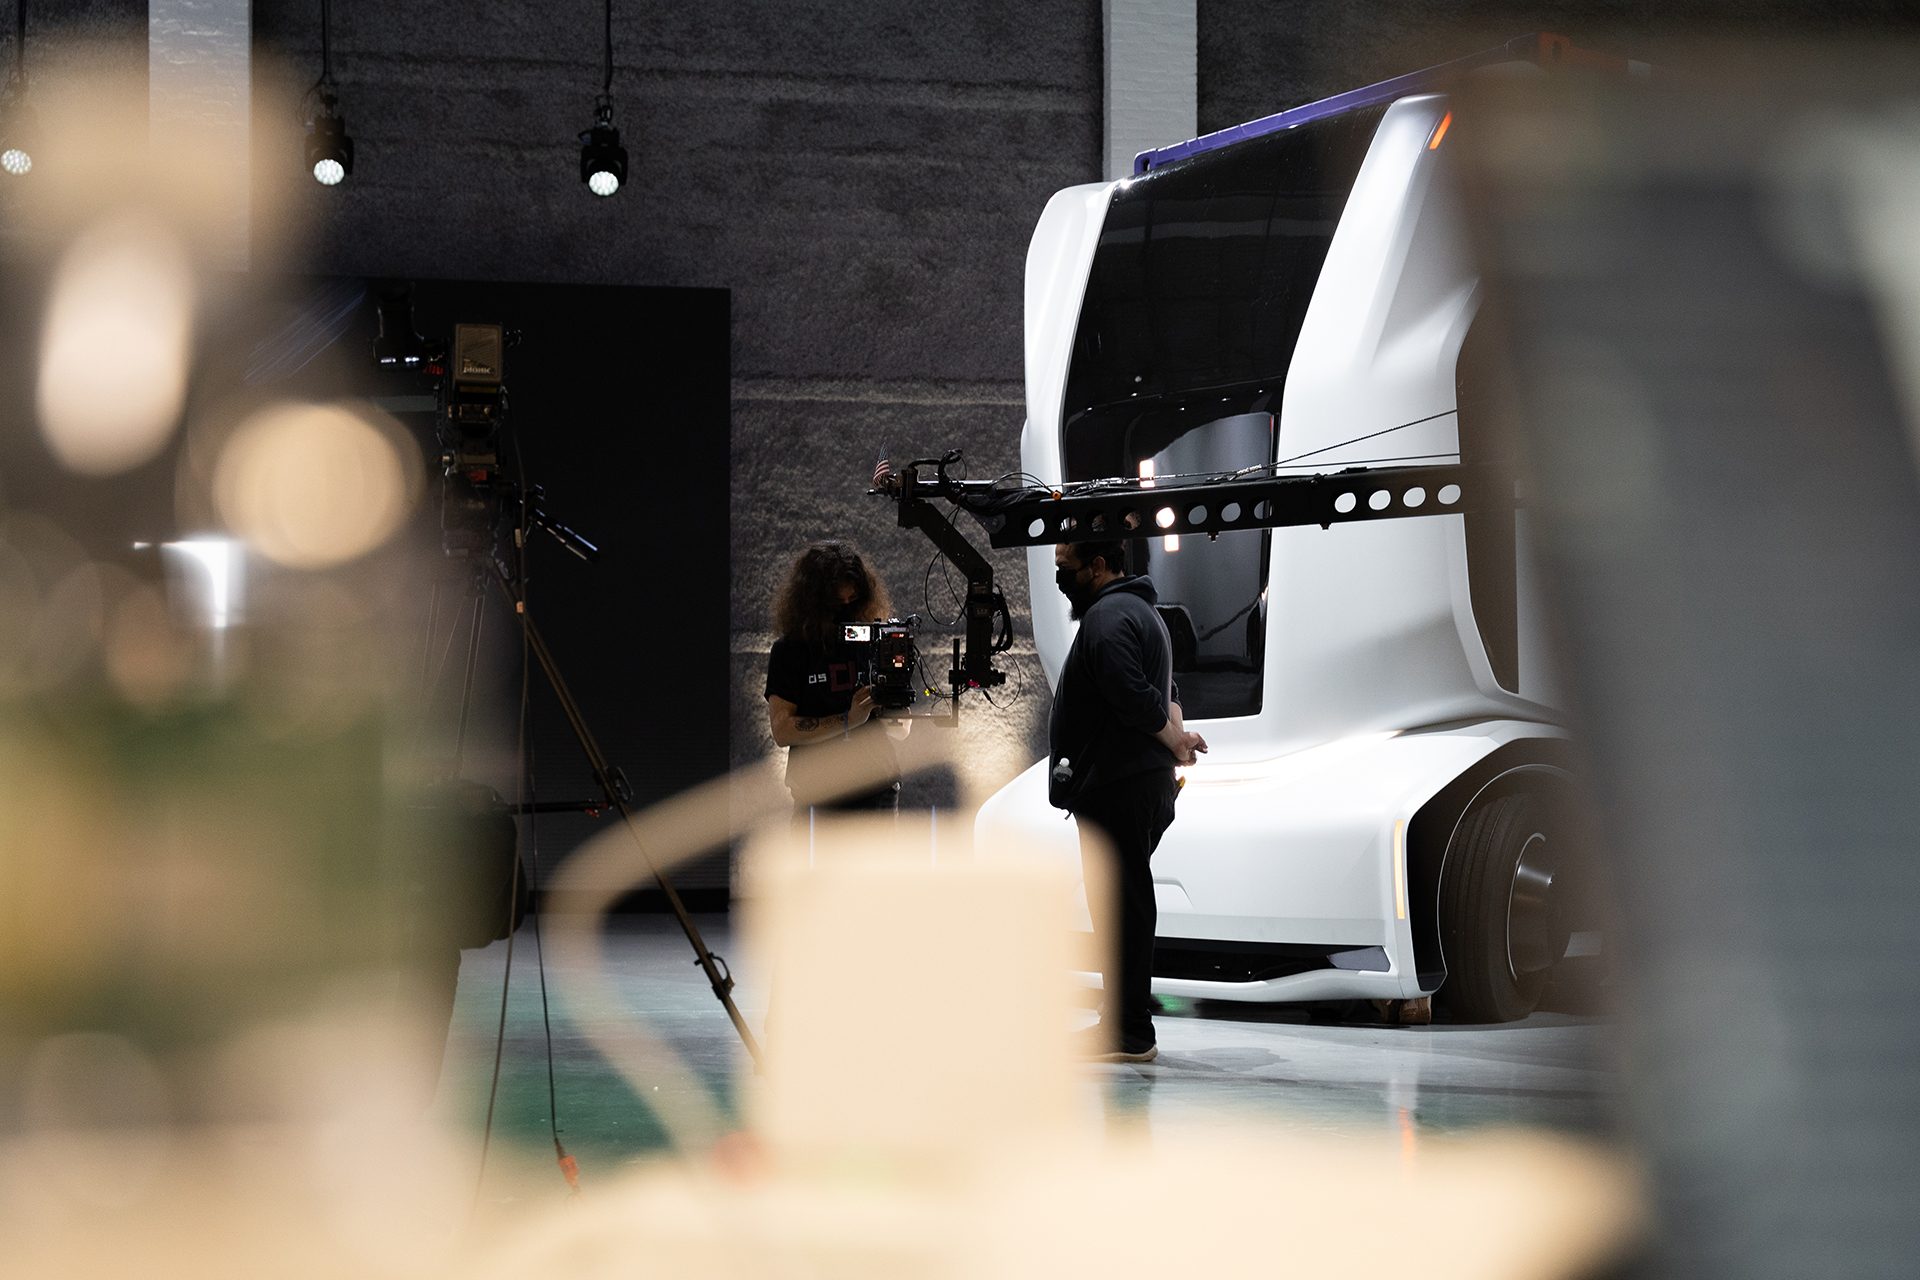 Behind the scenes with Einride's autonomous vehicle in the background